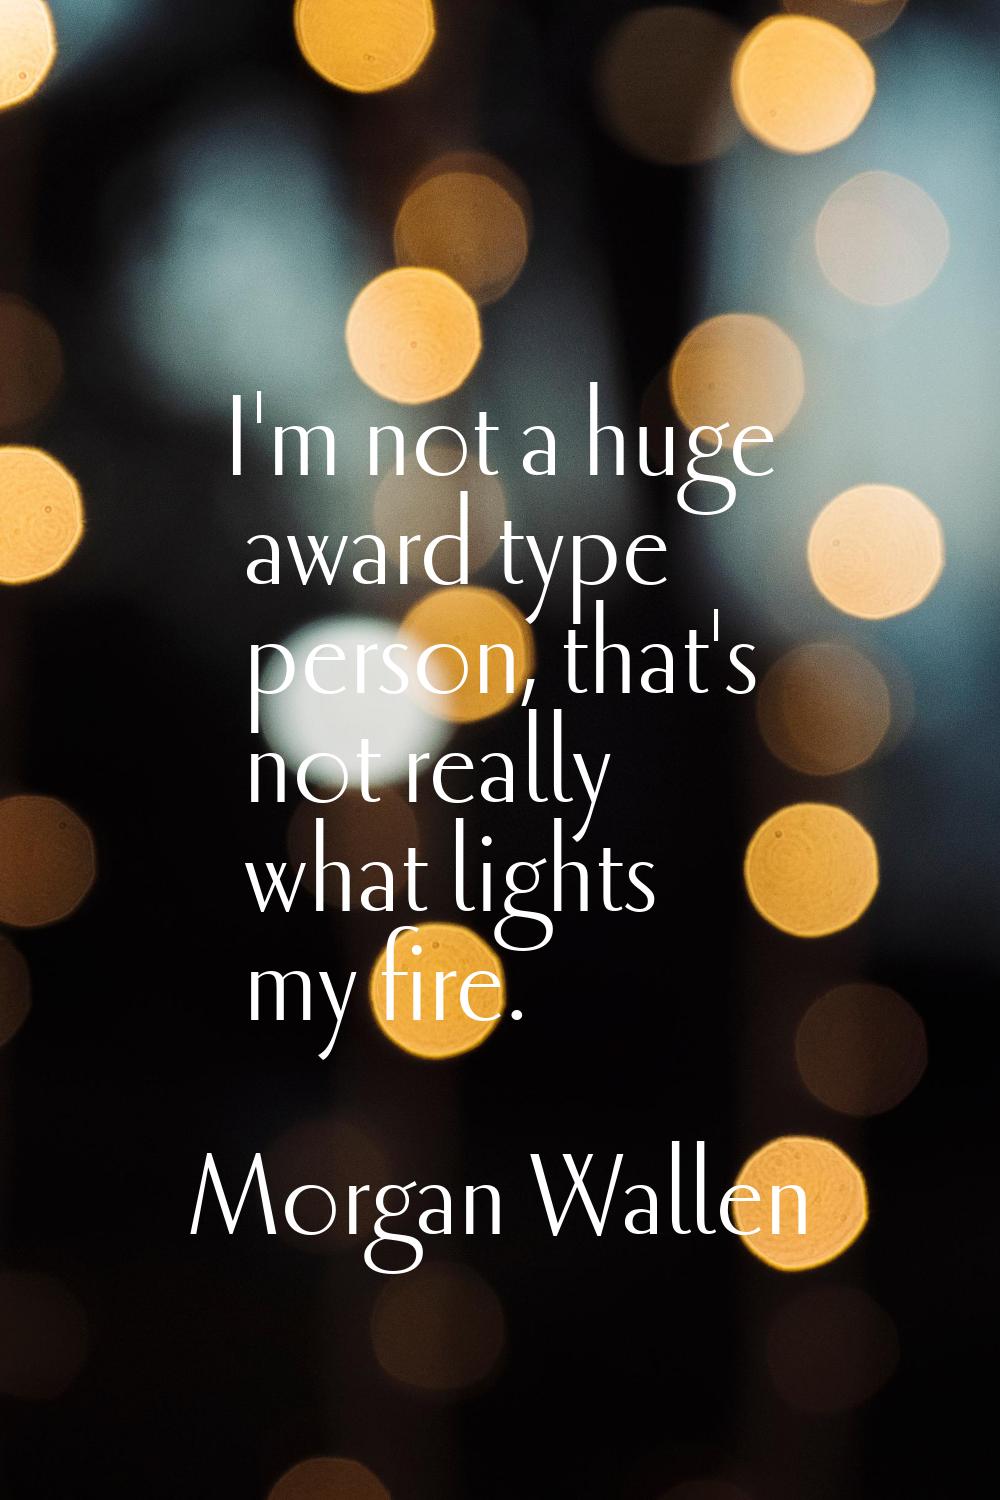 I'm not a huge award type person, that's not really what lights my fire.